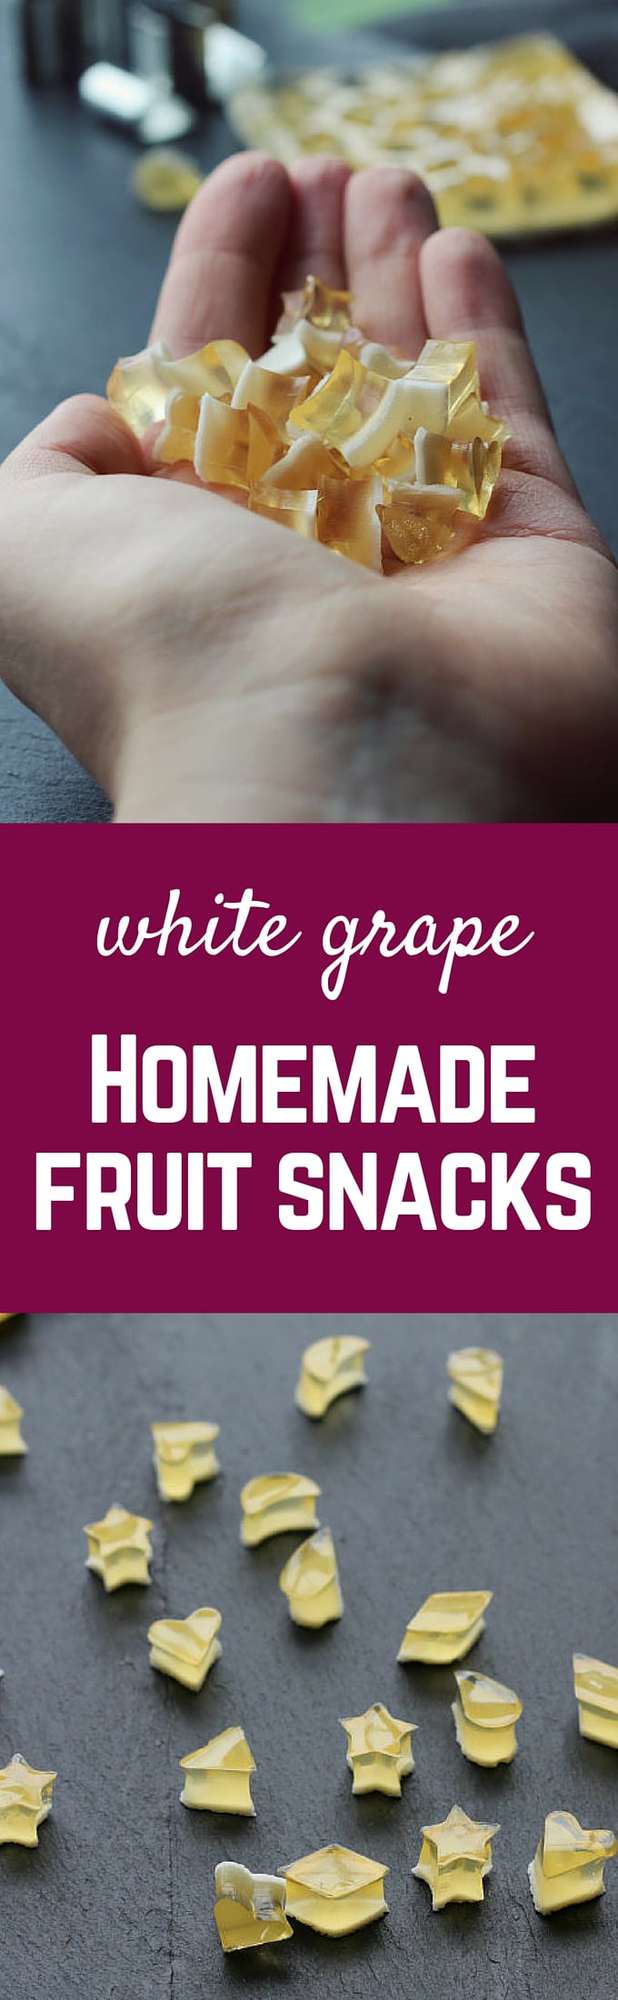 Fruit snacks are easy to make at home -- and you control the flavors and ingredients. You will love these homemade fruit snacks. Get the easy recipe on RachelCooks.com!